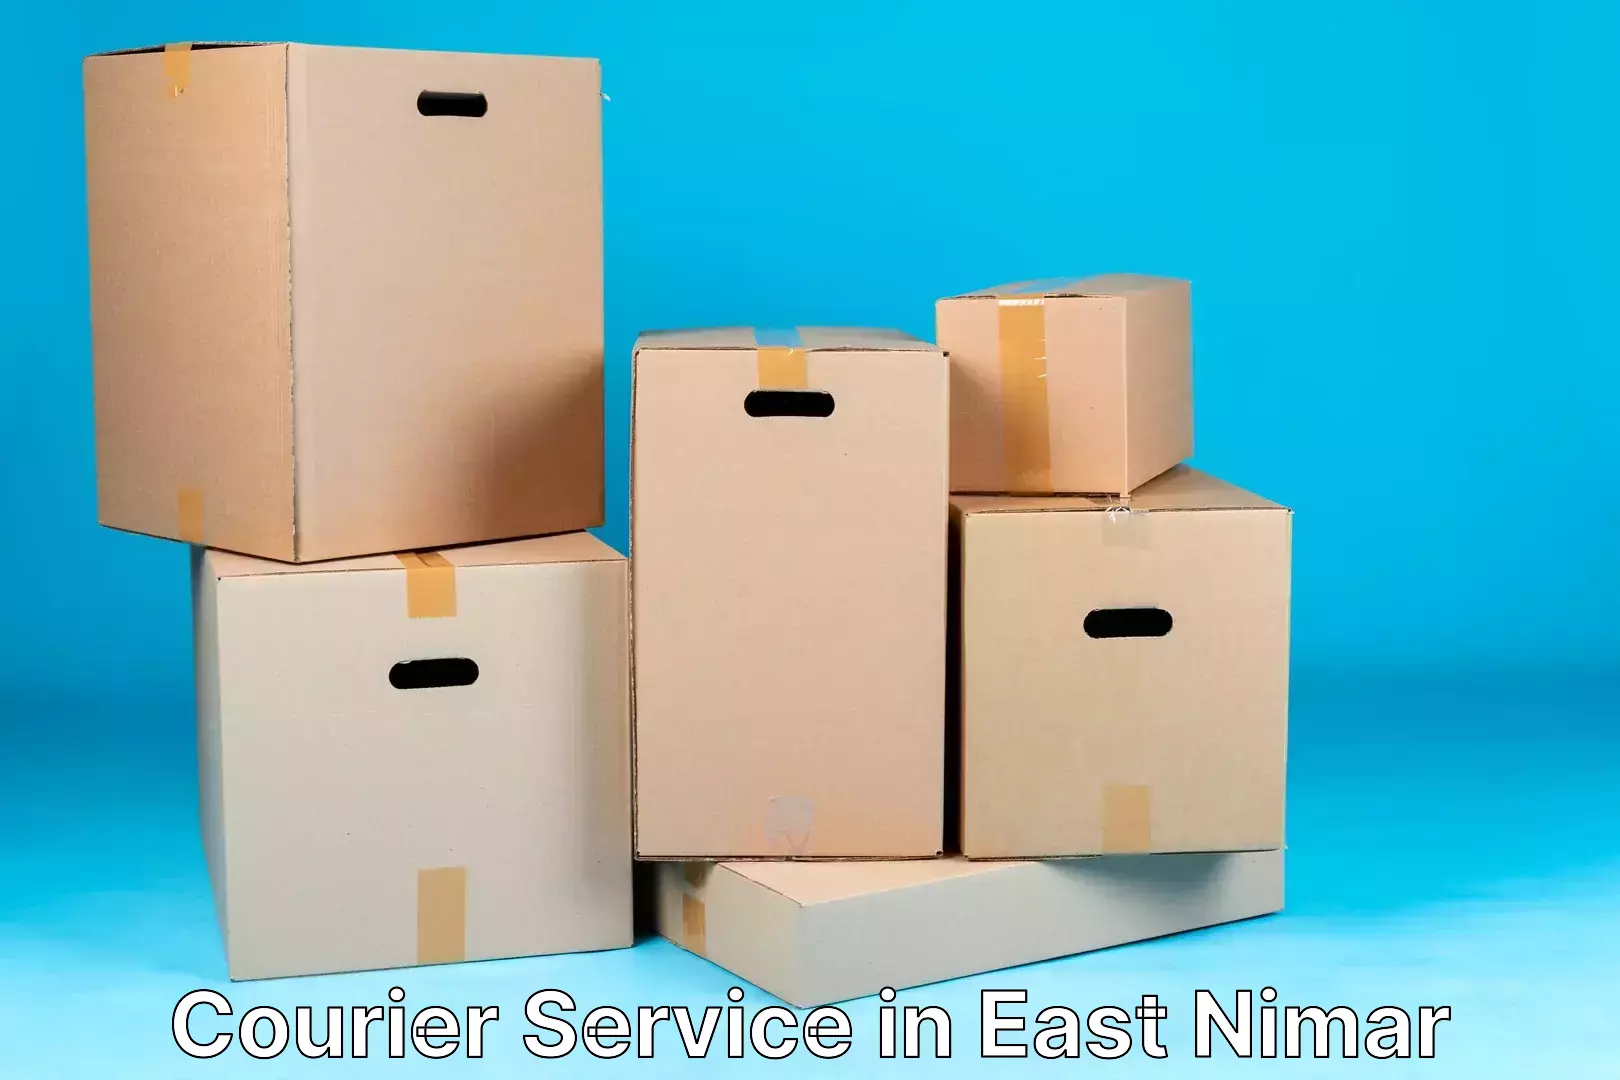 Global delivery options in East Nimar